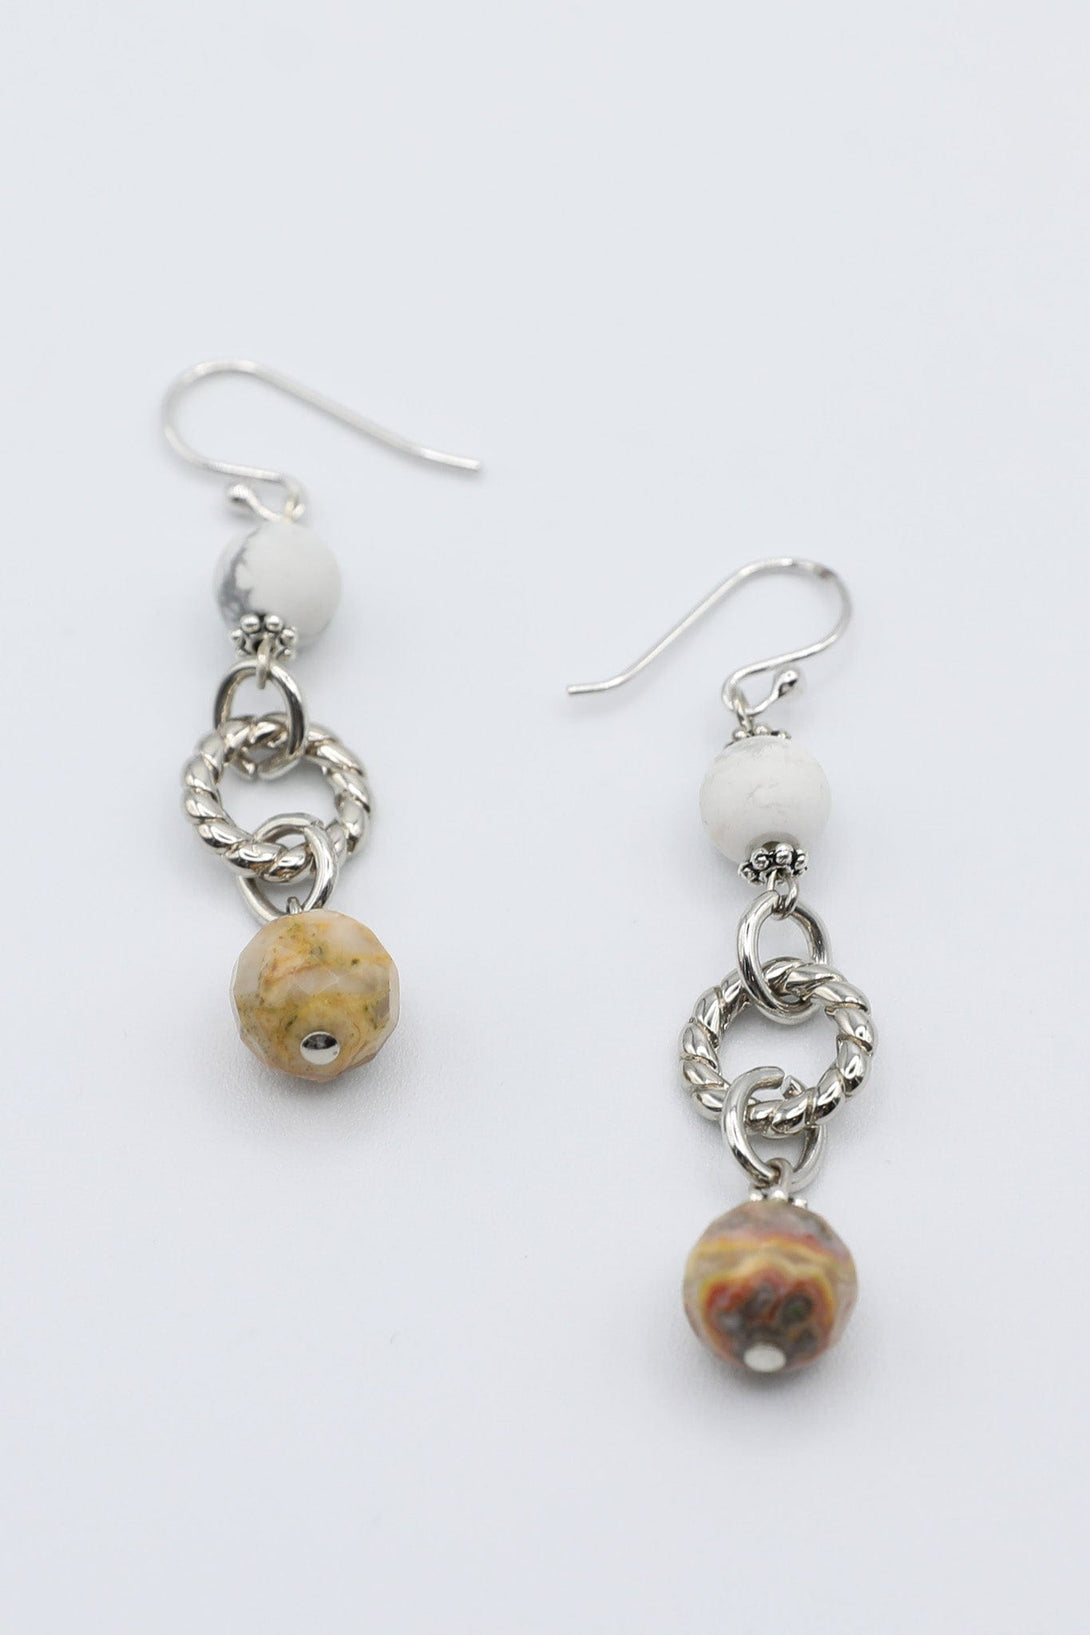 Earrings with Two Stones and Silver Accents